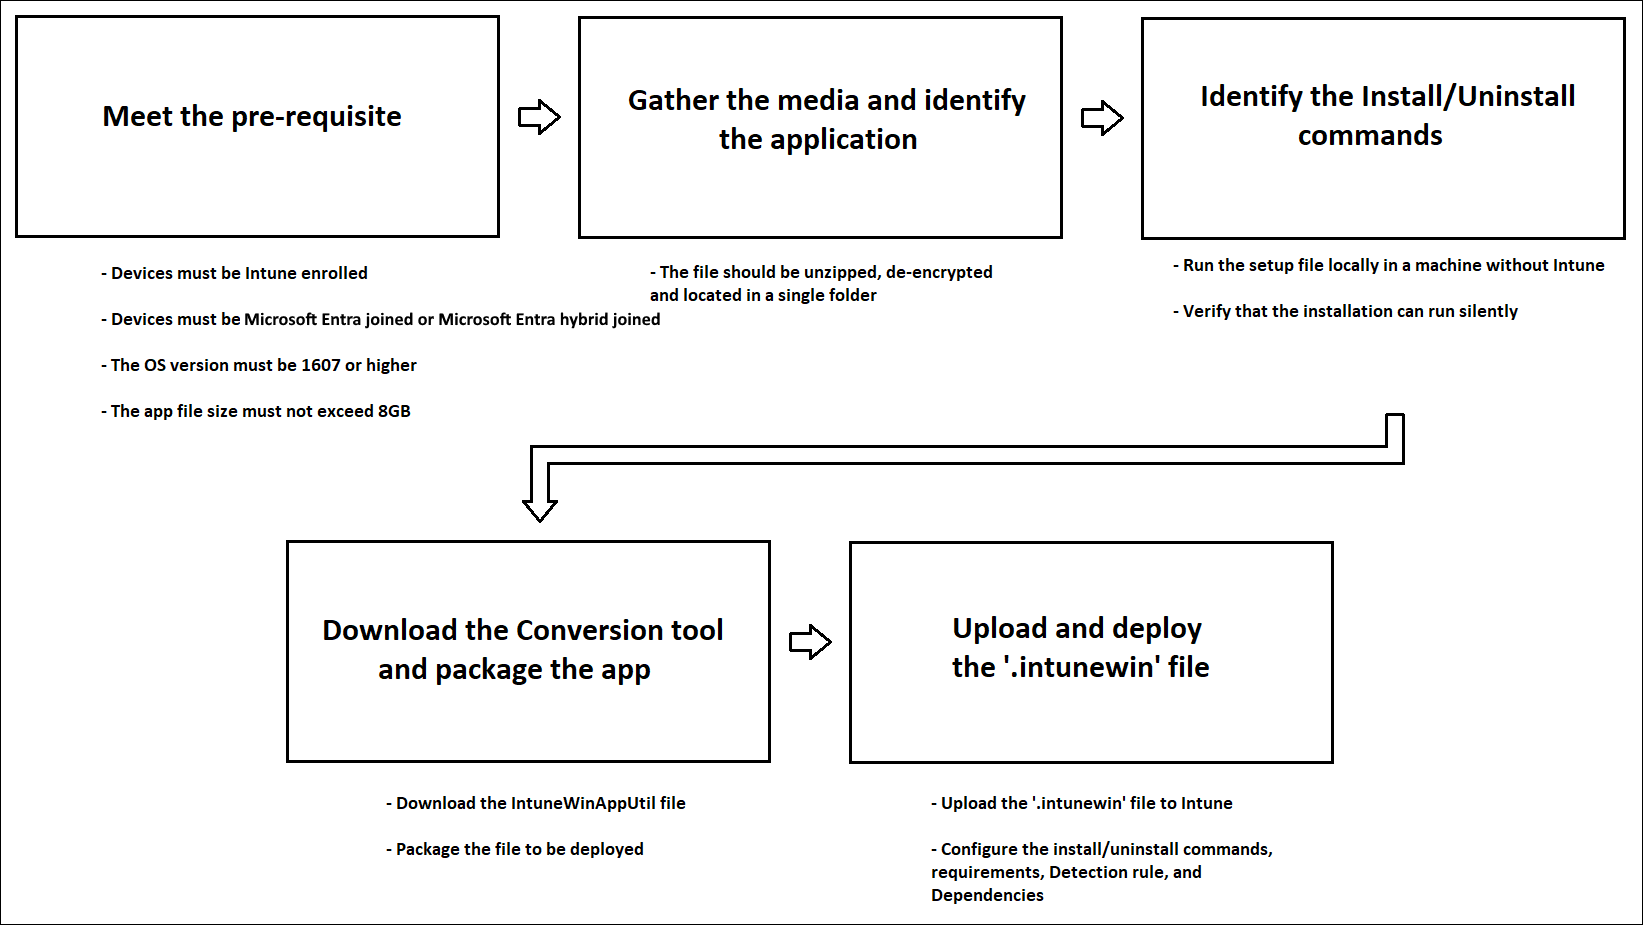 Diagram shows flow of the deployment of a Win32 app via Intune.